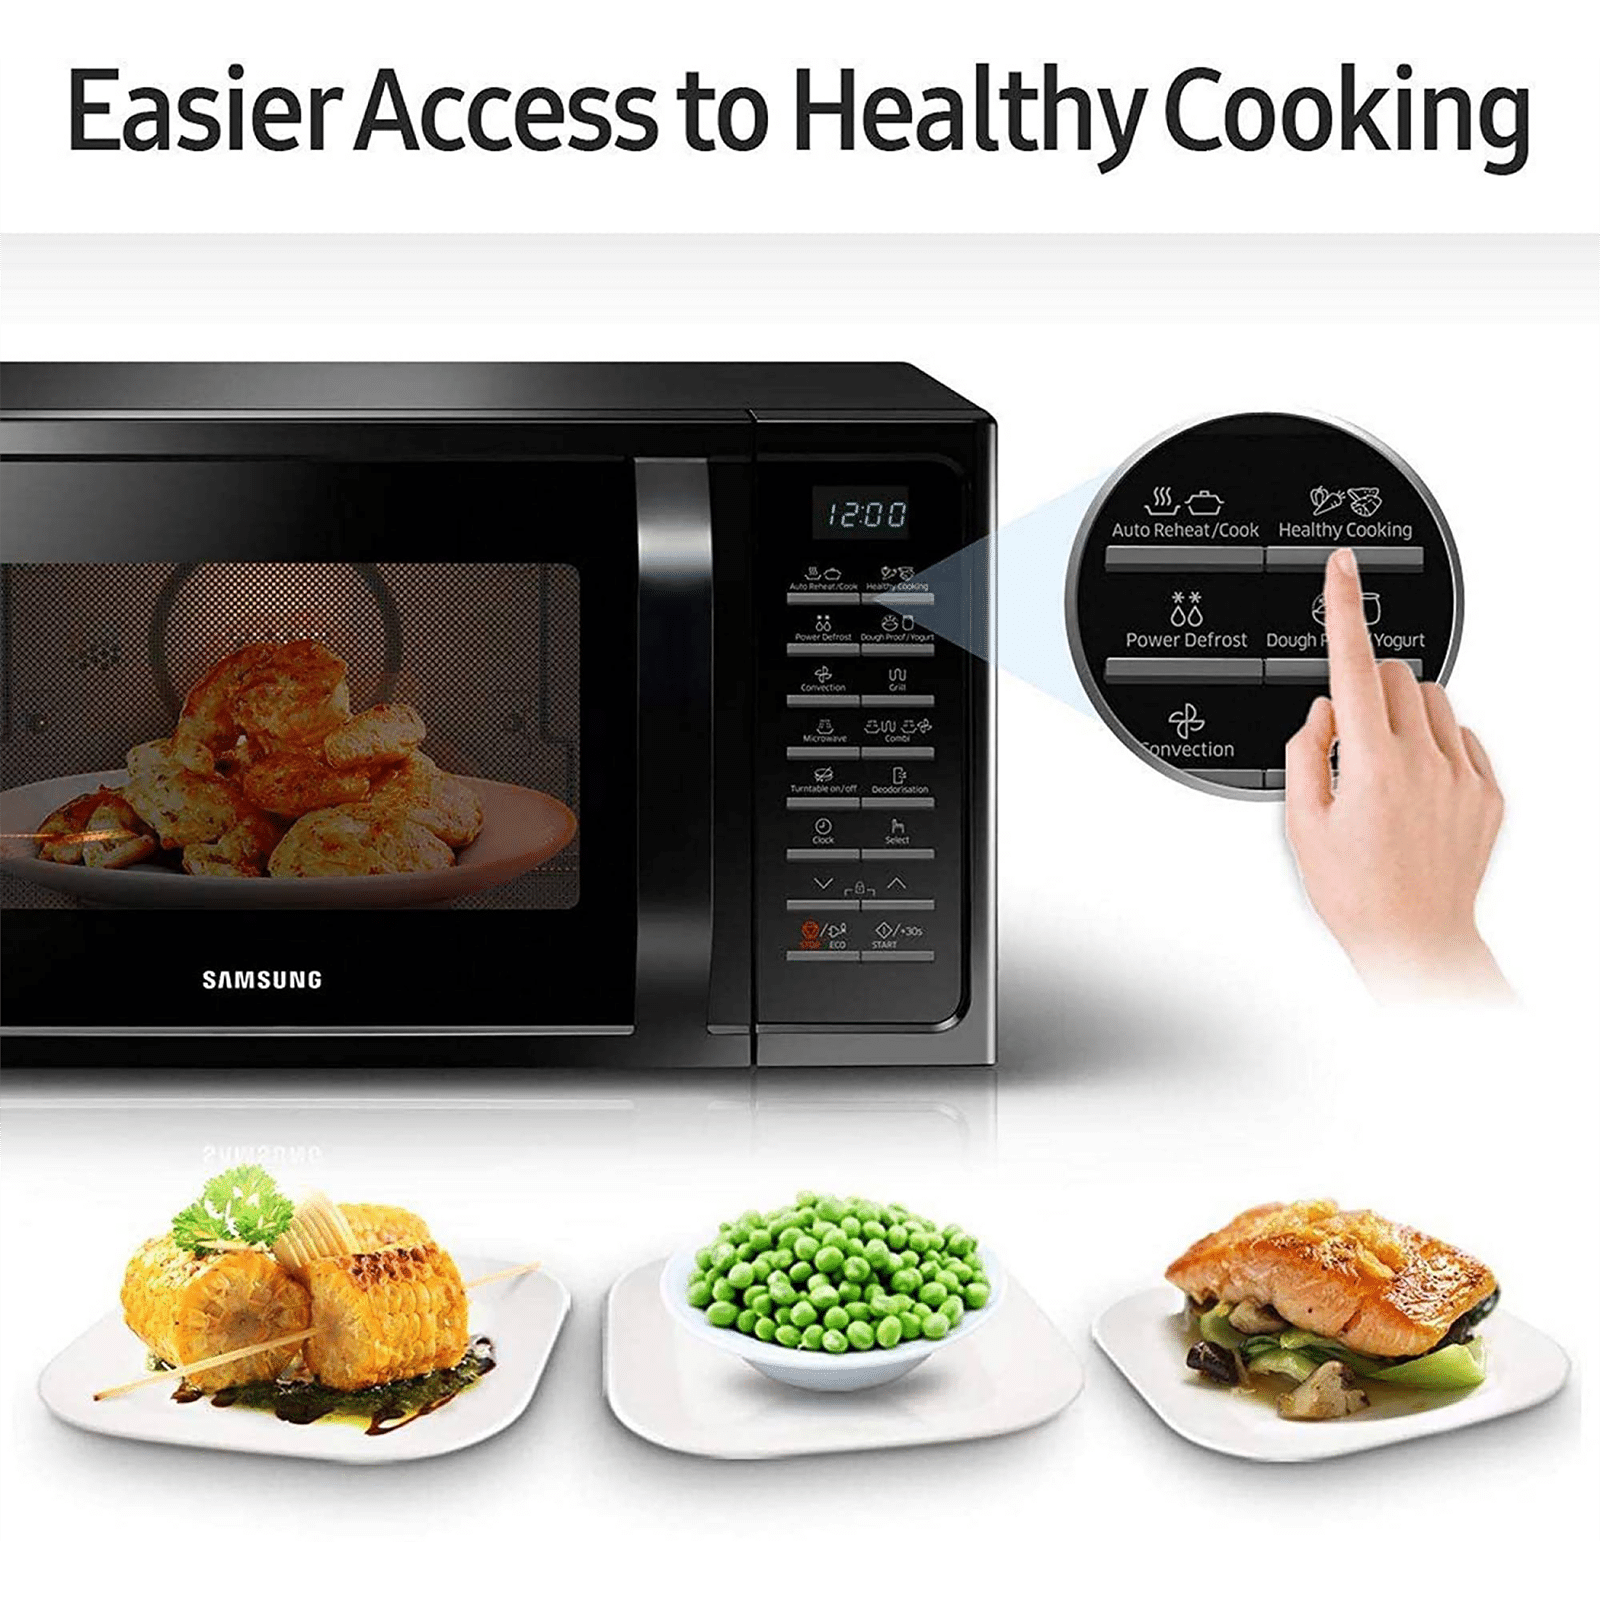 Buy SAMSUNG 28L Convection Microwave Oven with Quartz Convection Heater ...